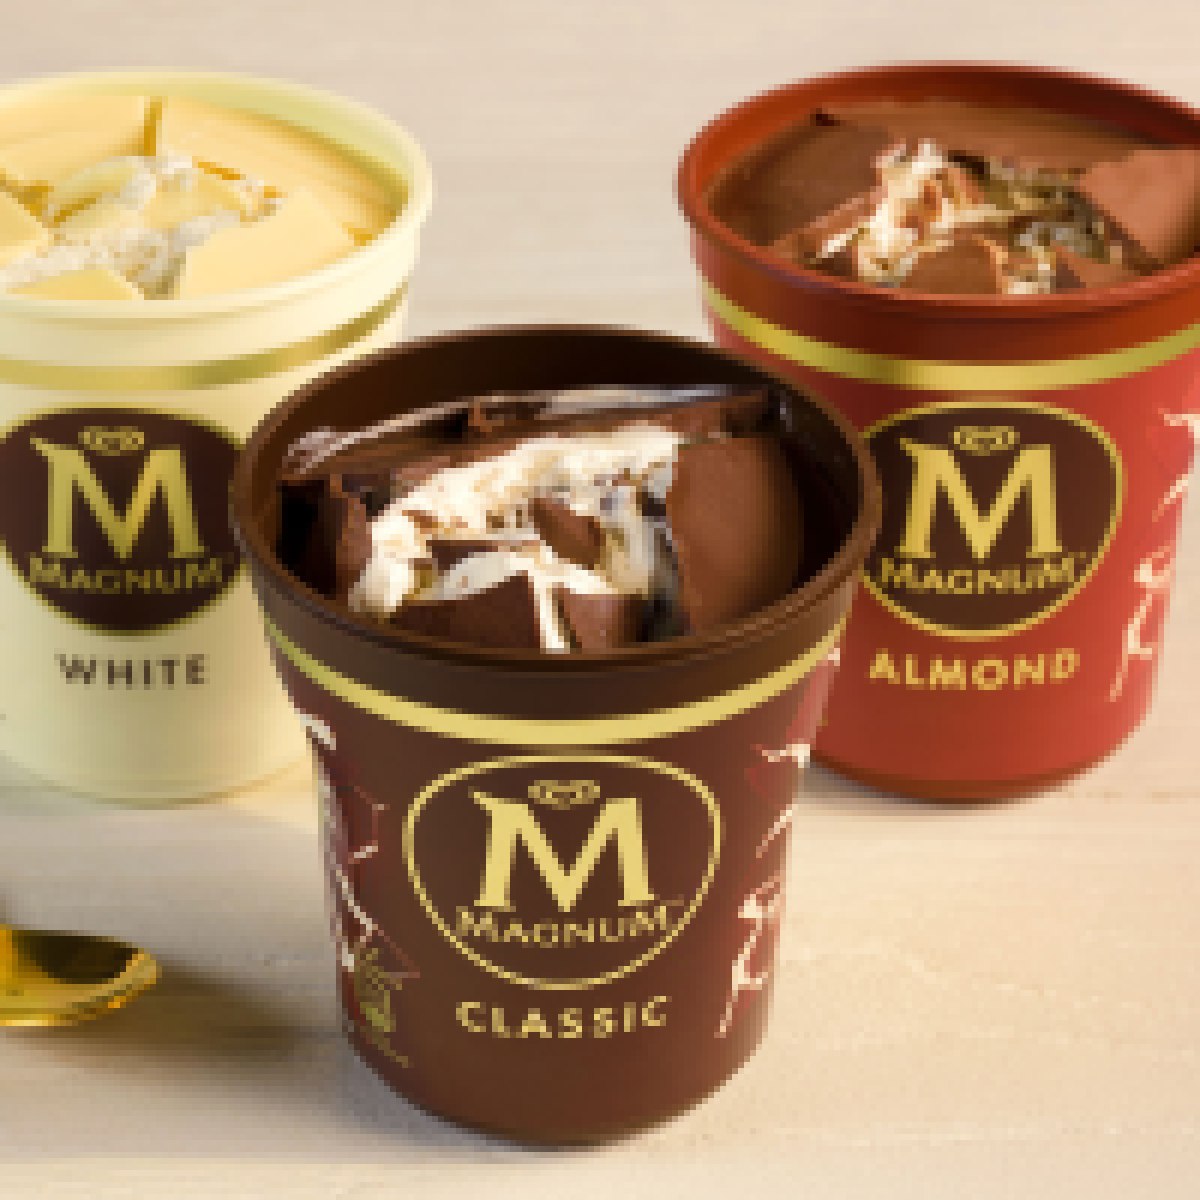 Magnum Pints offer a fun, new ice cream experience